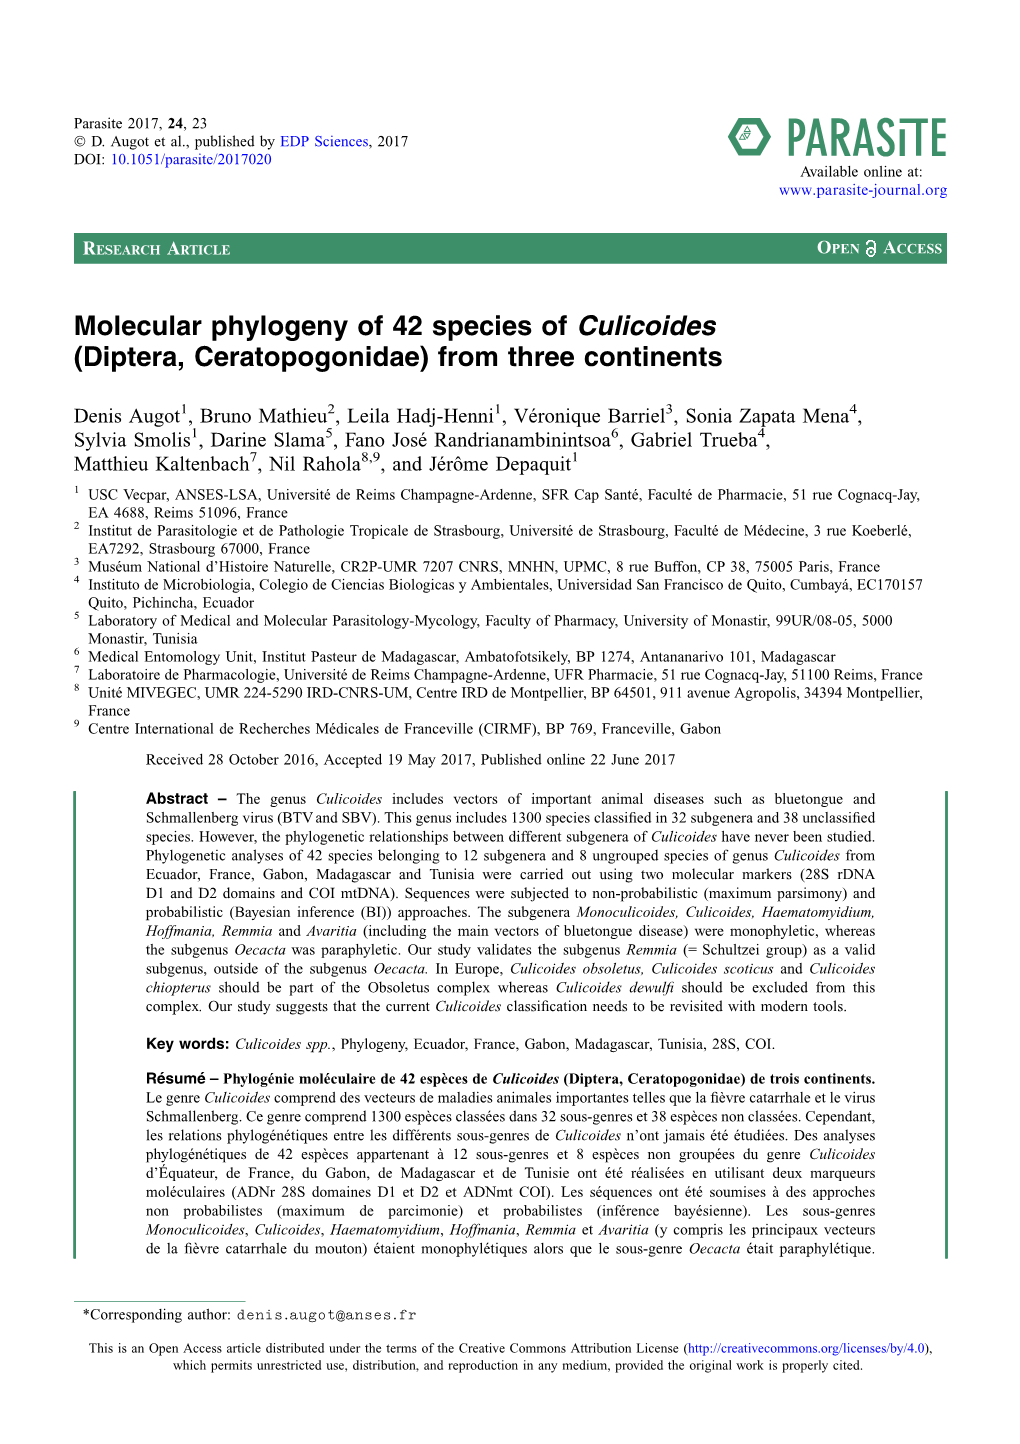 Molecular Phylogeny of 42 Species of Culicoides (Diptera, Ceratopogonidae) from Three Continents